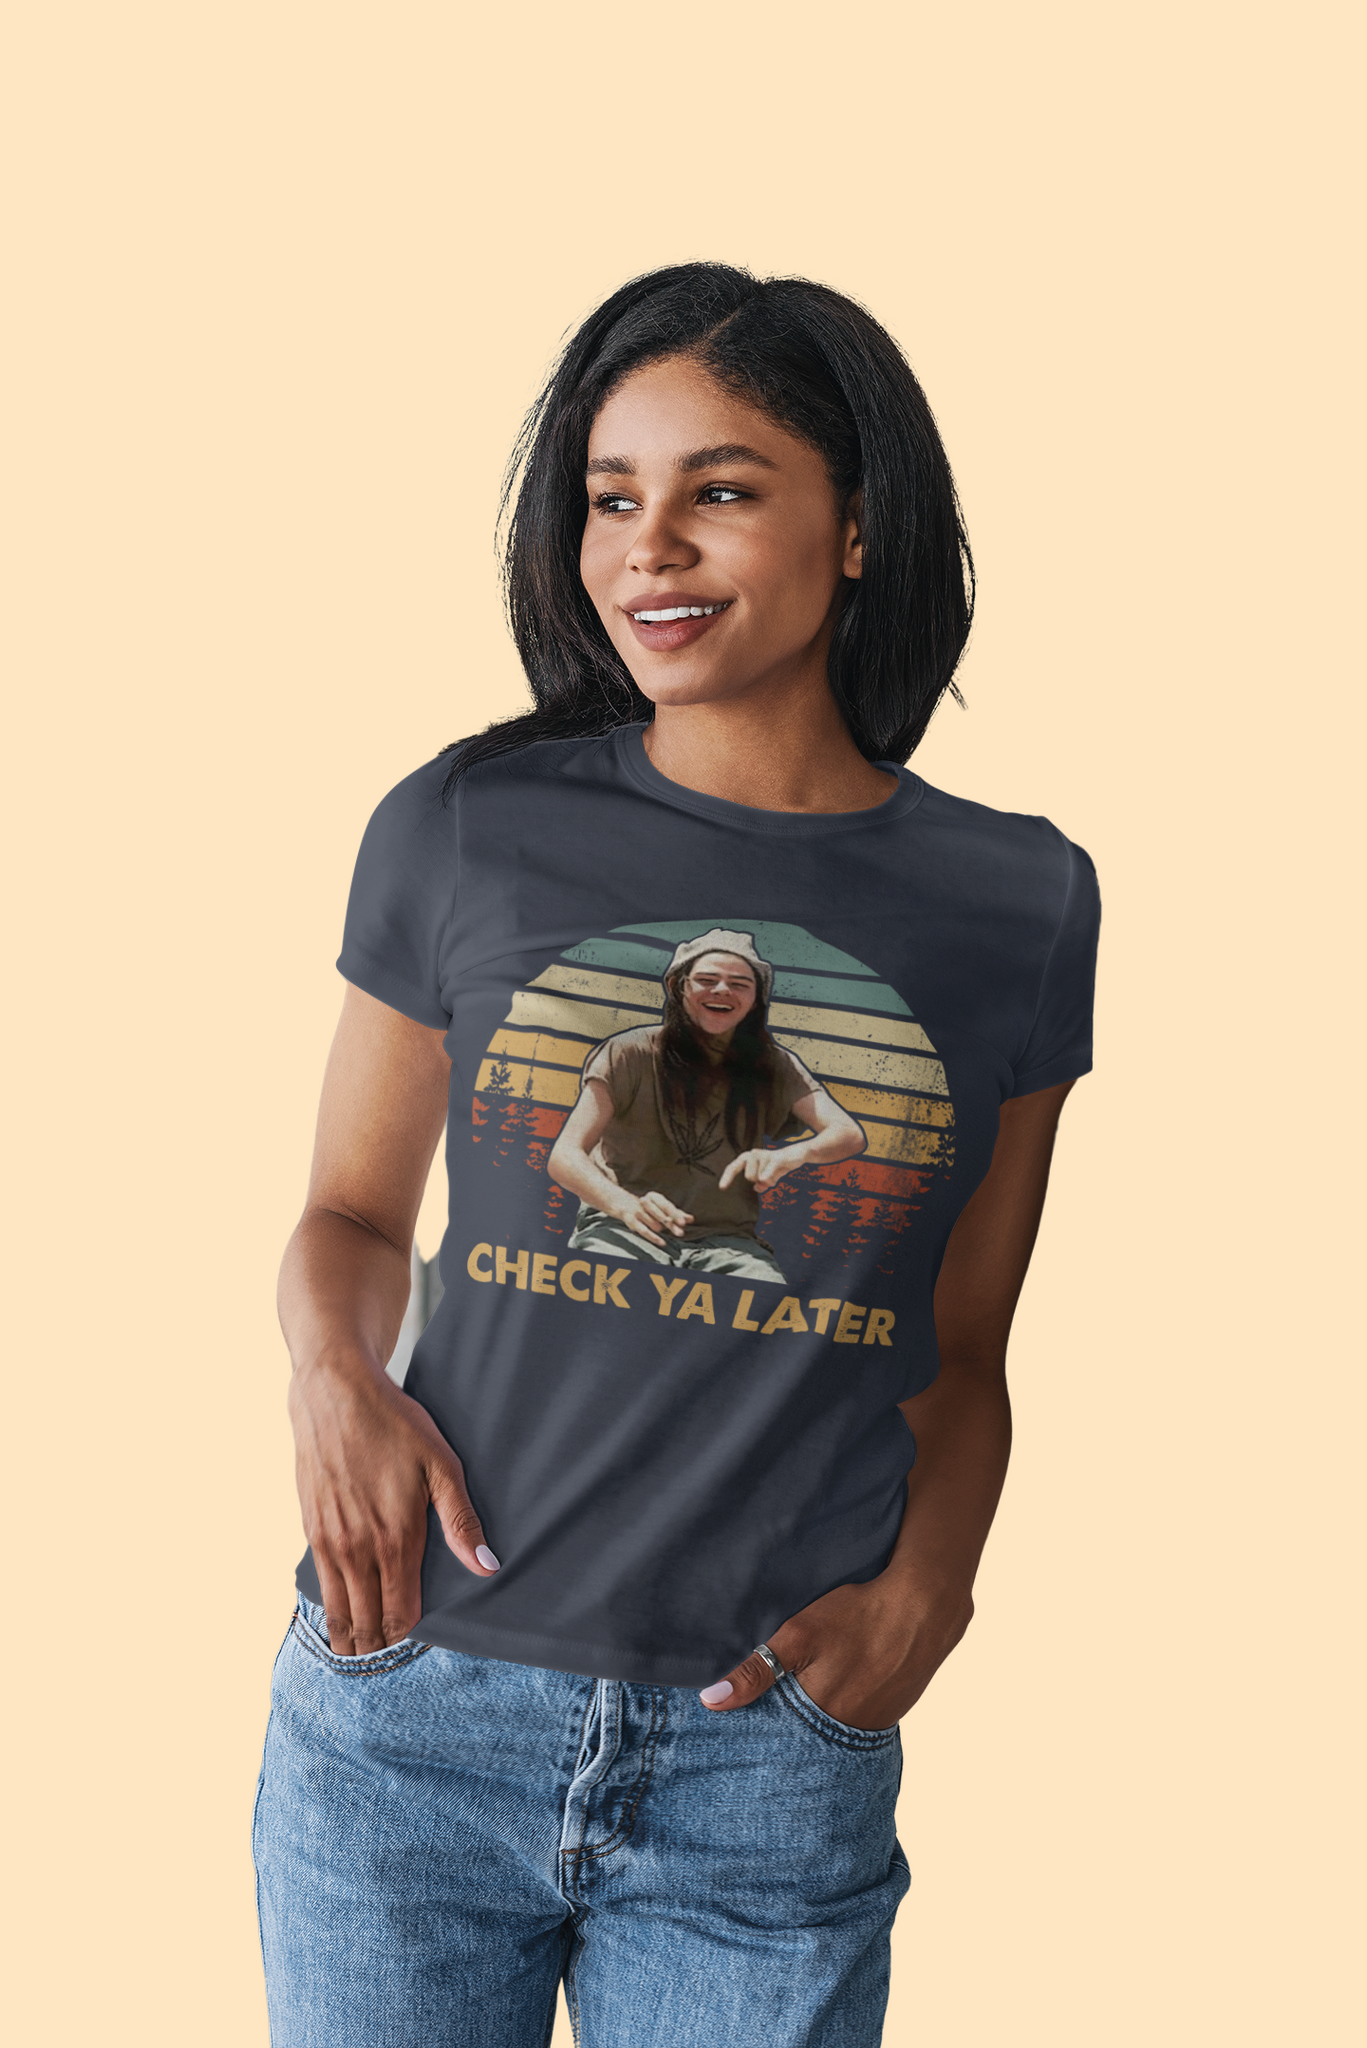 Dazed And Confused Vintage T Shirt, Ron Slater T Shirt, Check Ya Later Tshirt